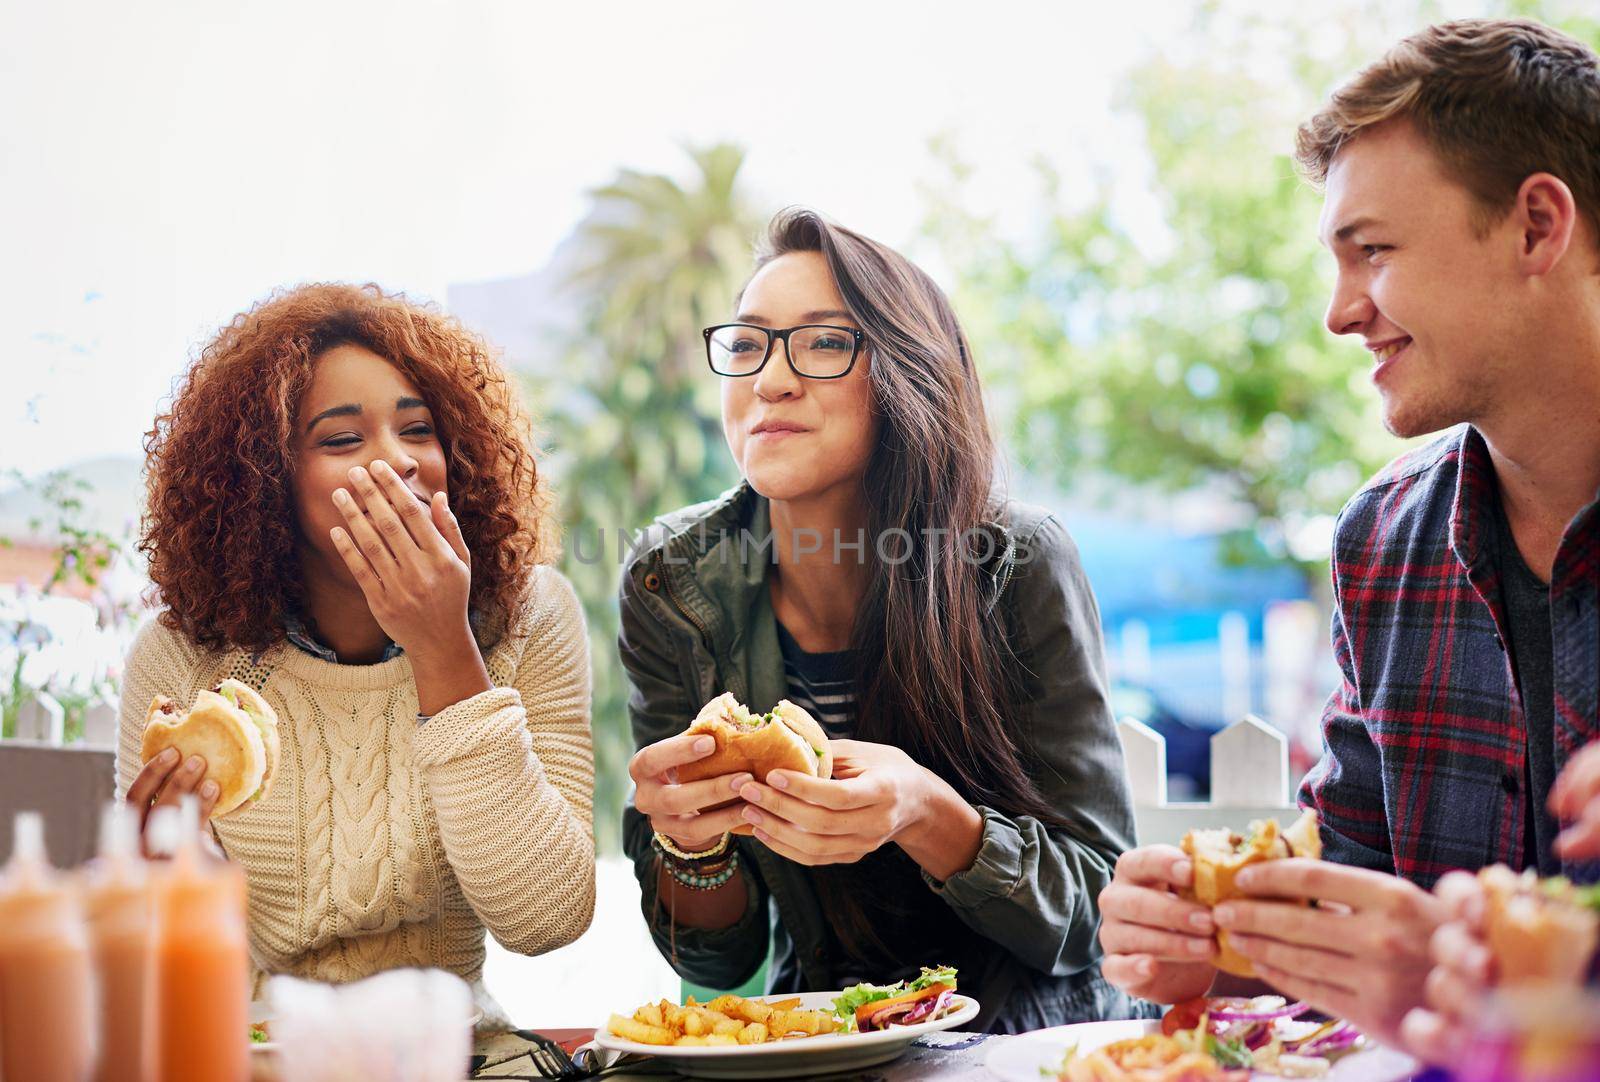 Good food and laughter go hand-in-hand. Cropped shot of three friends eating burgers outdoors. by YuriArcurs